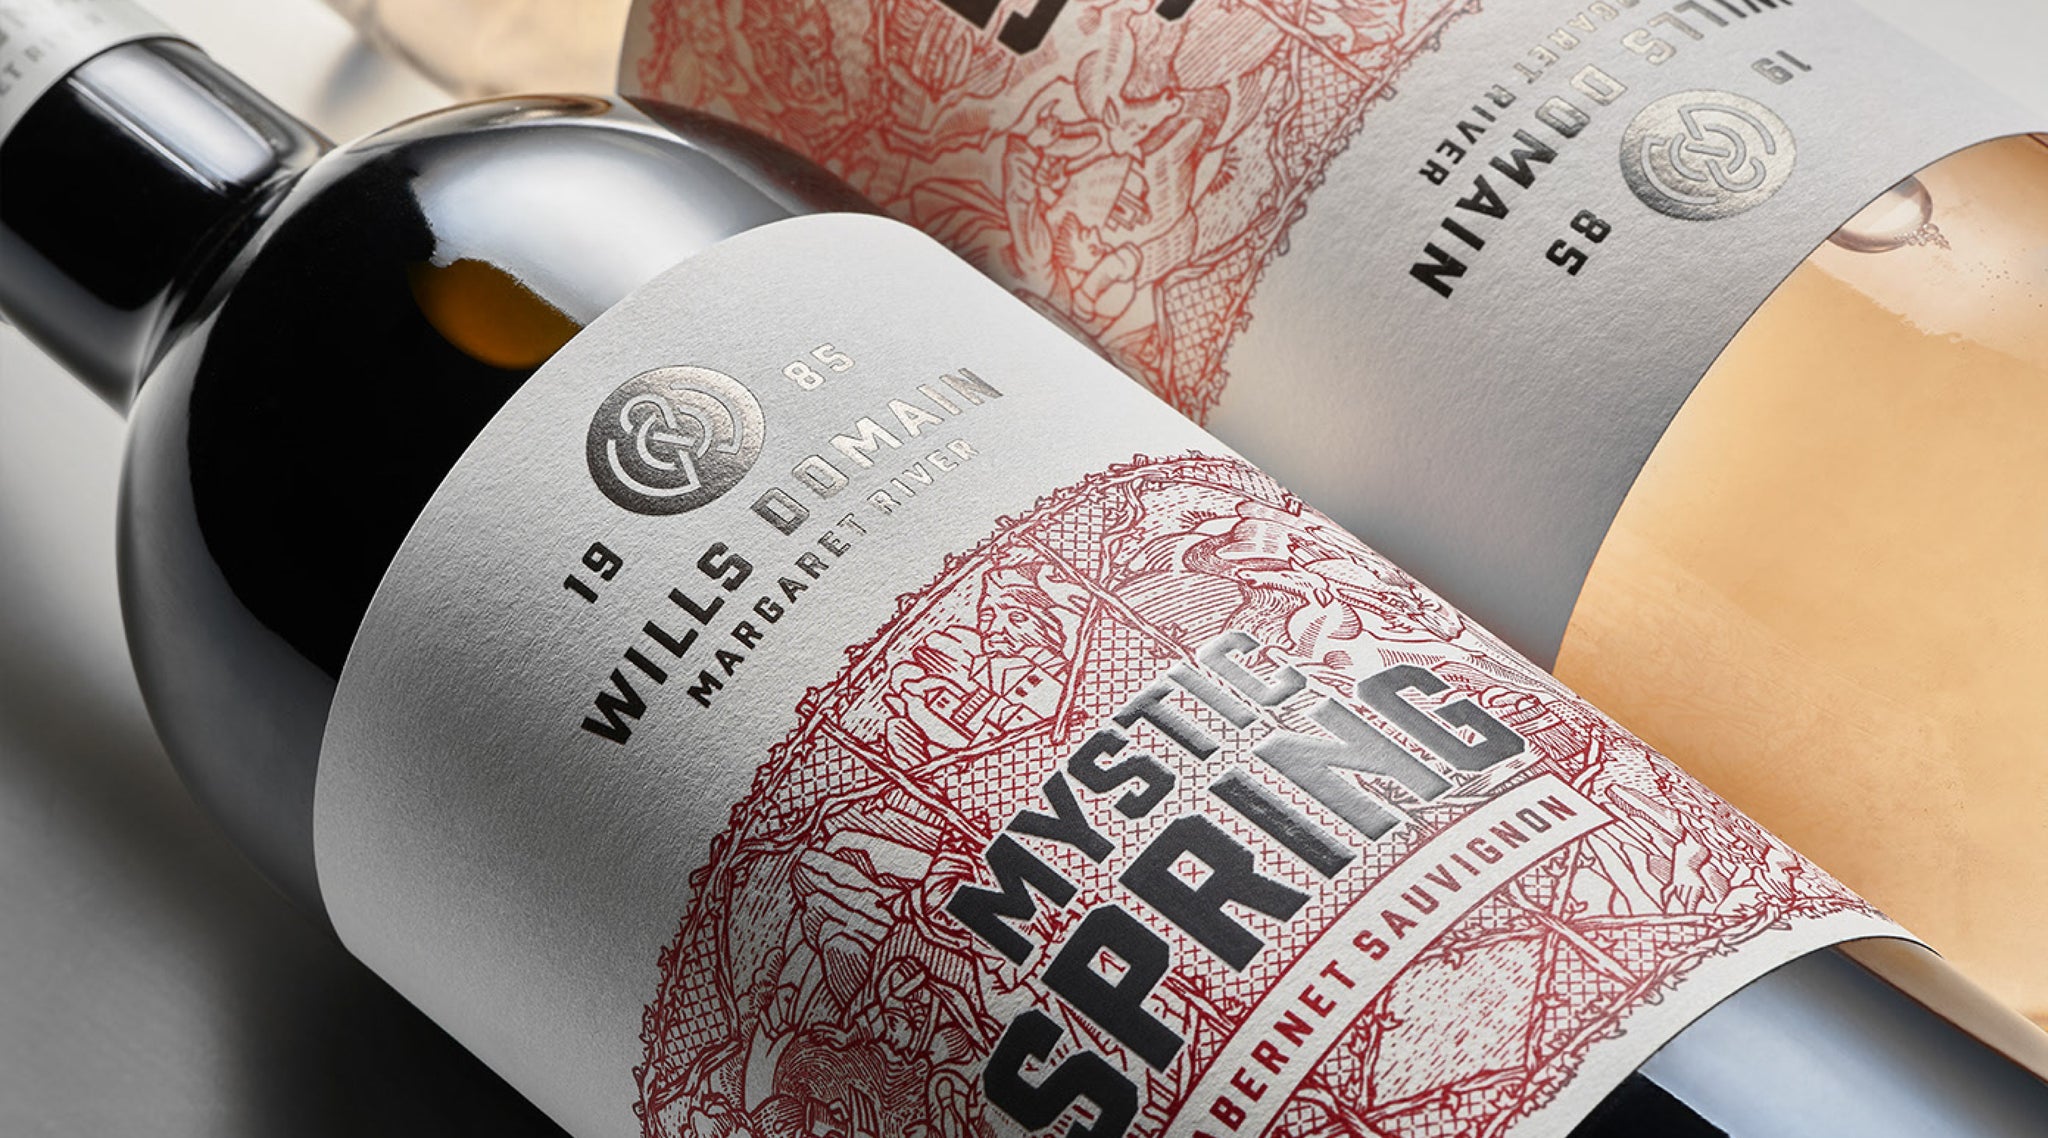 A bottle of Mystic Spring Cabernet Sauvignon offers affordable excellence and a very drinkable Margaret River red.